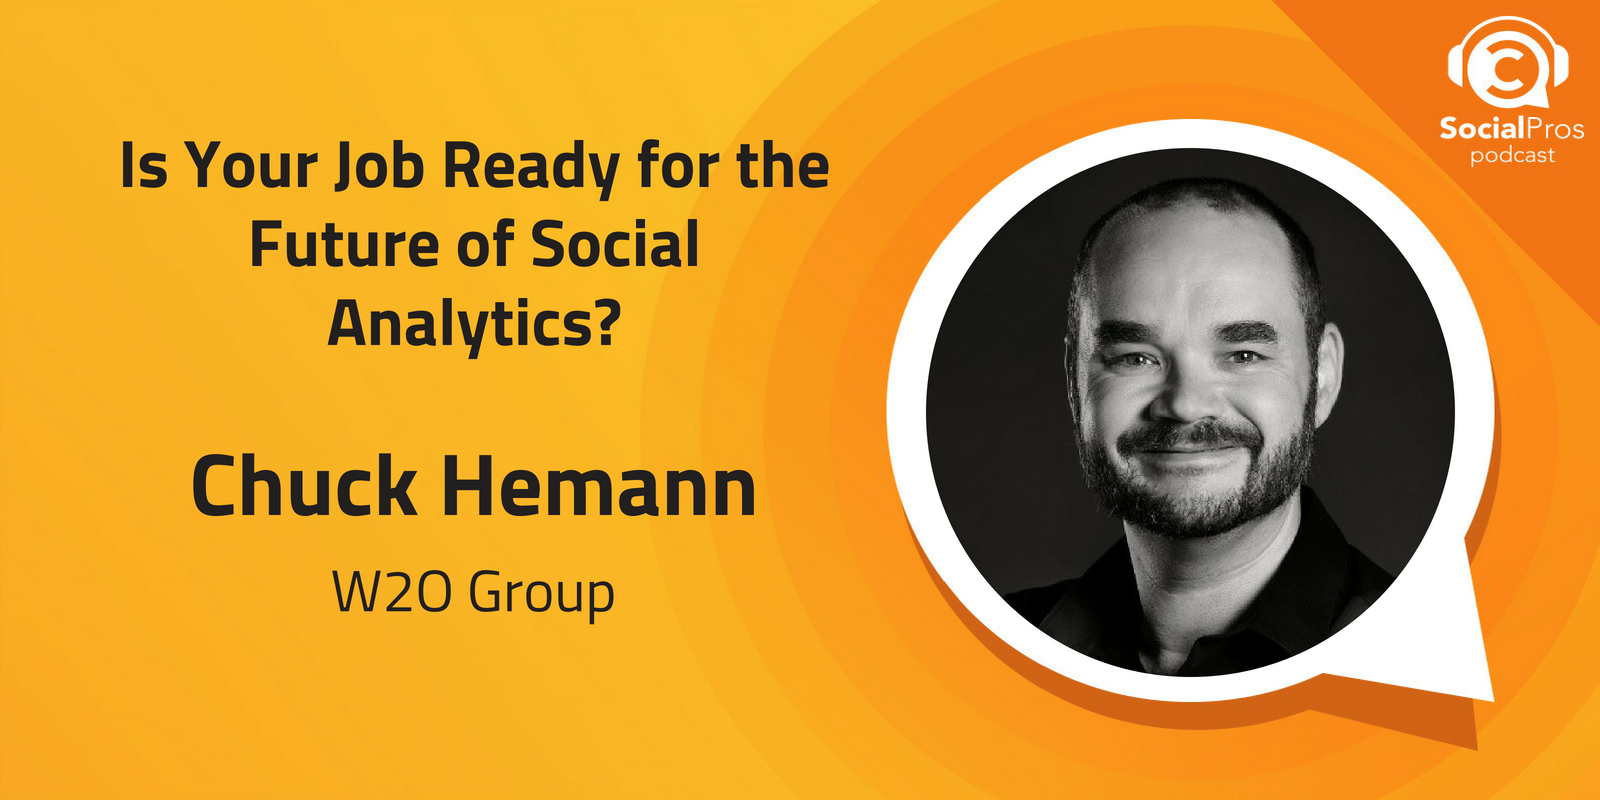 Is Your Job Ready for the Future of Social Analytics?